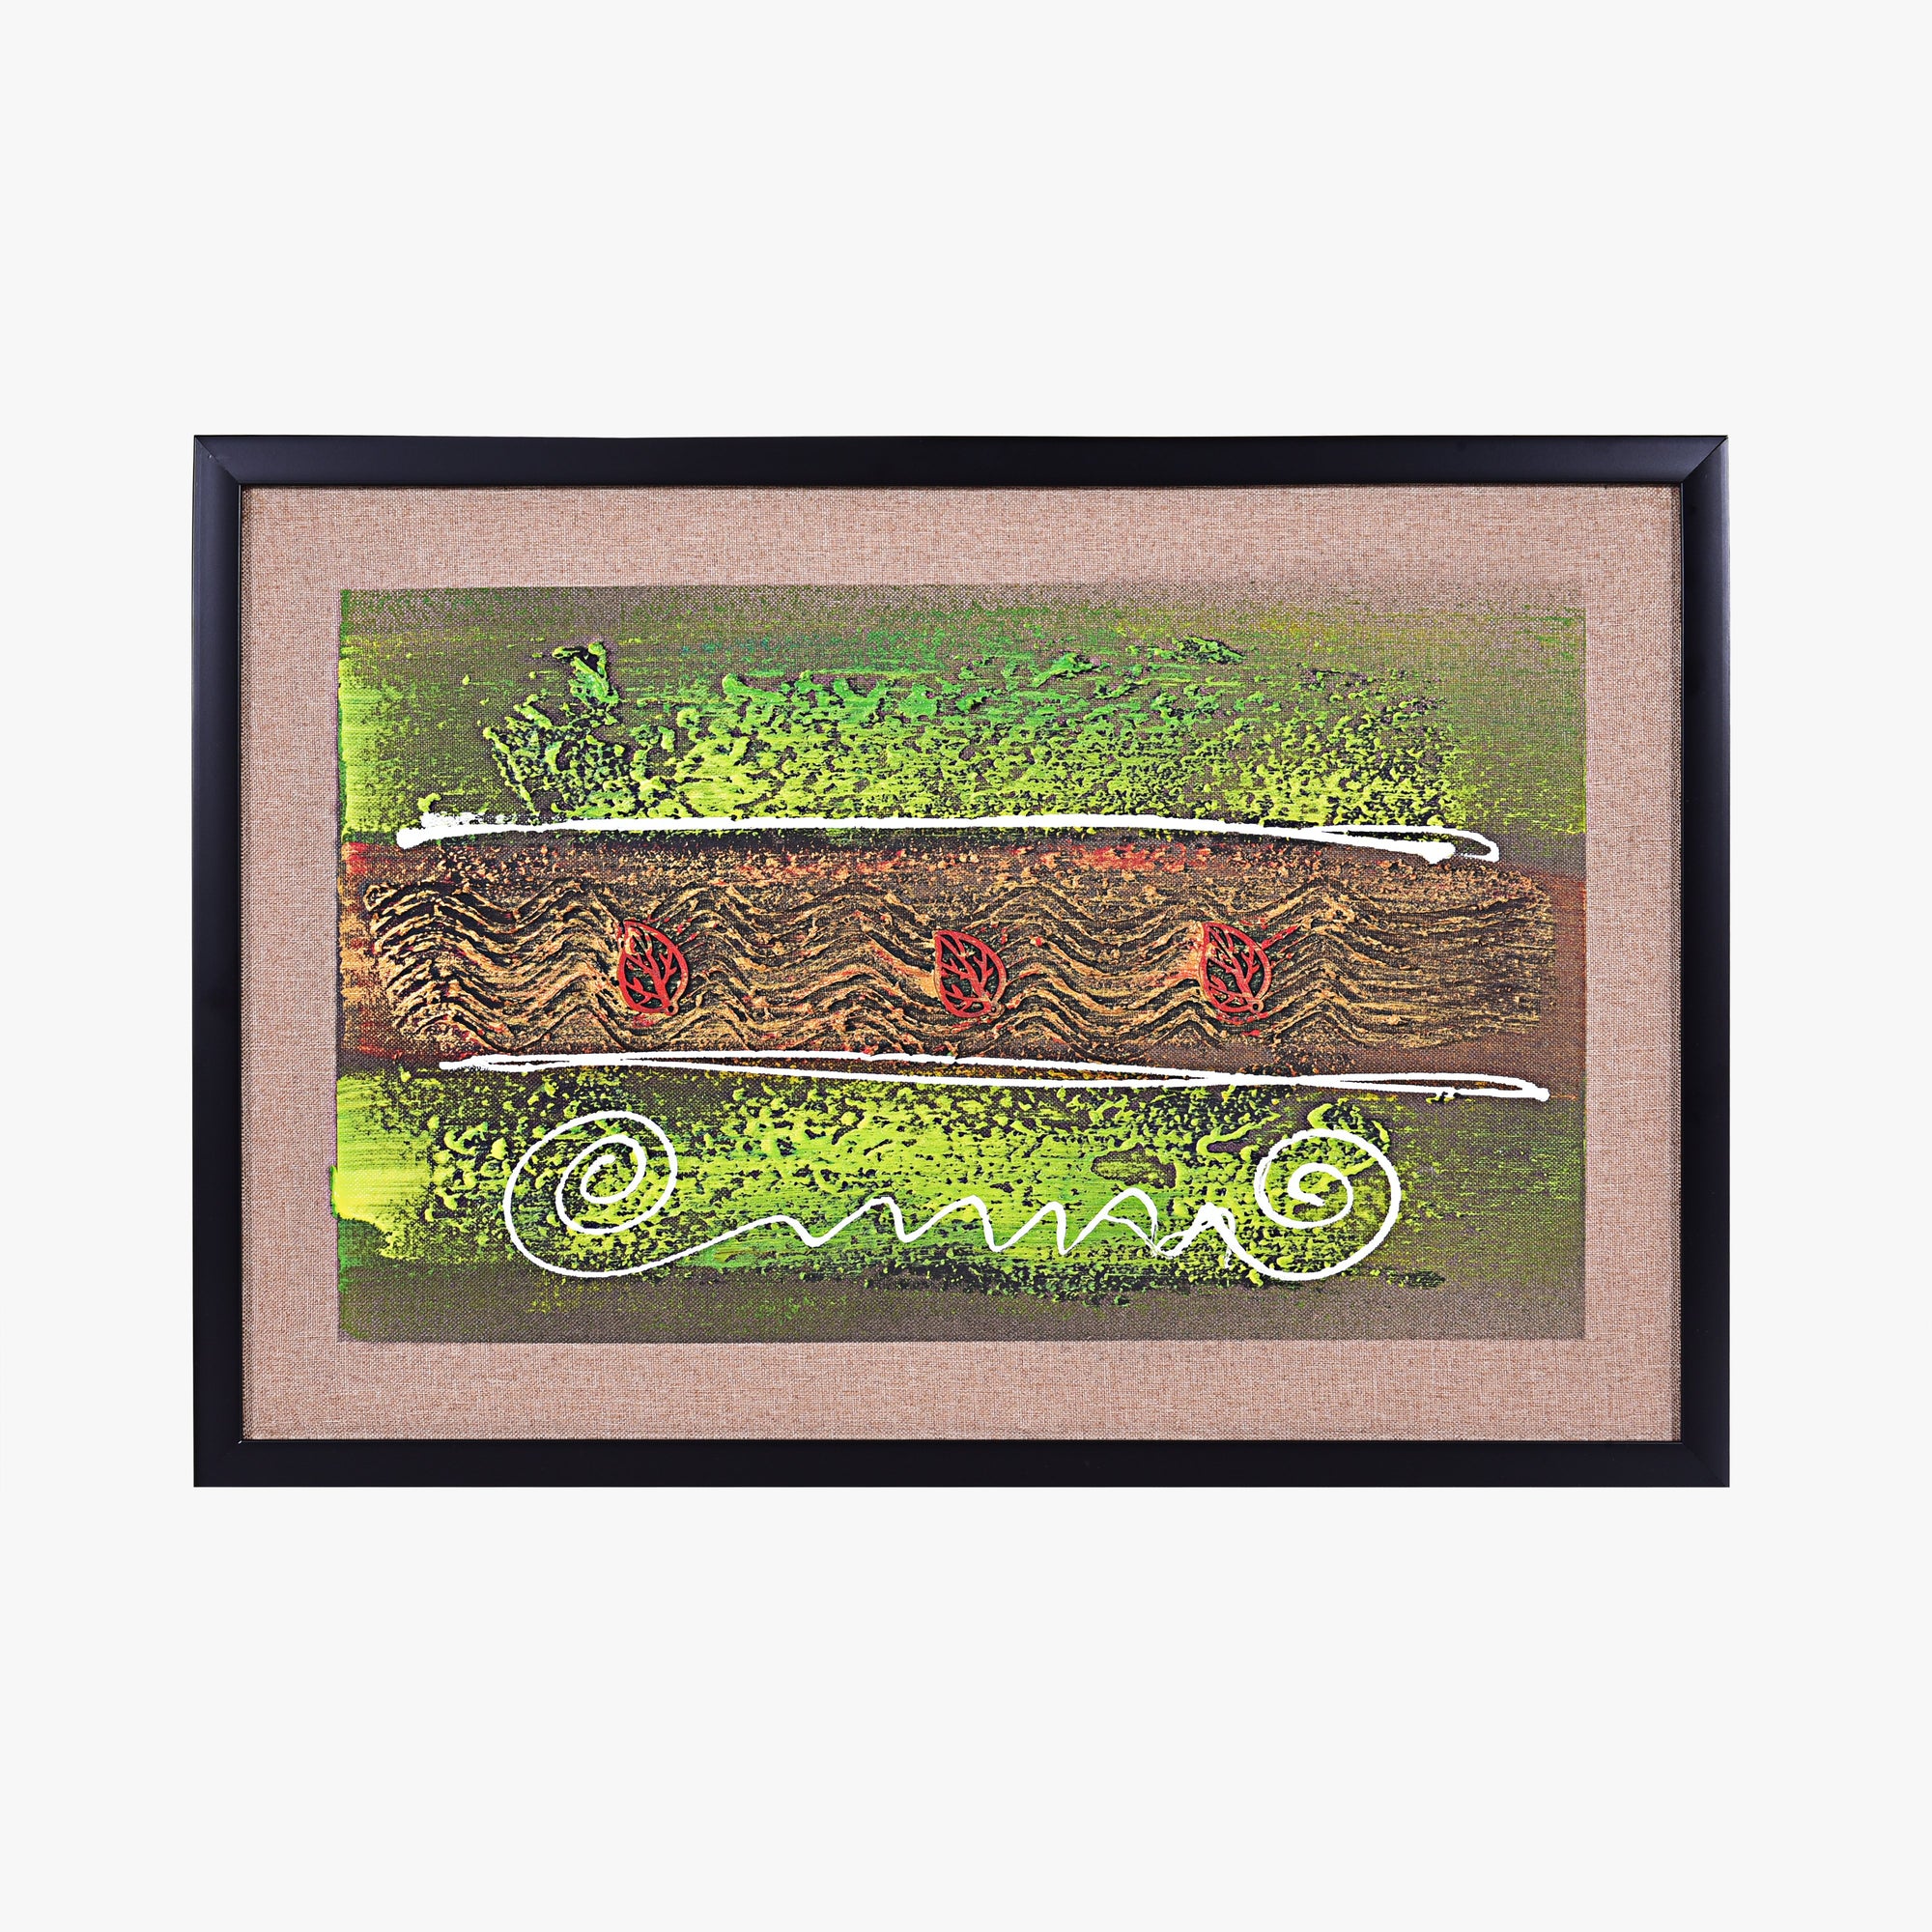 ABSTRACT GREEN MEADOW FRAMED ART